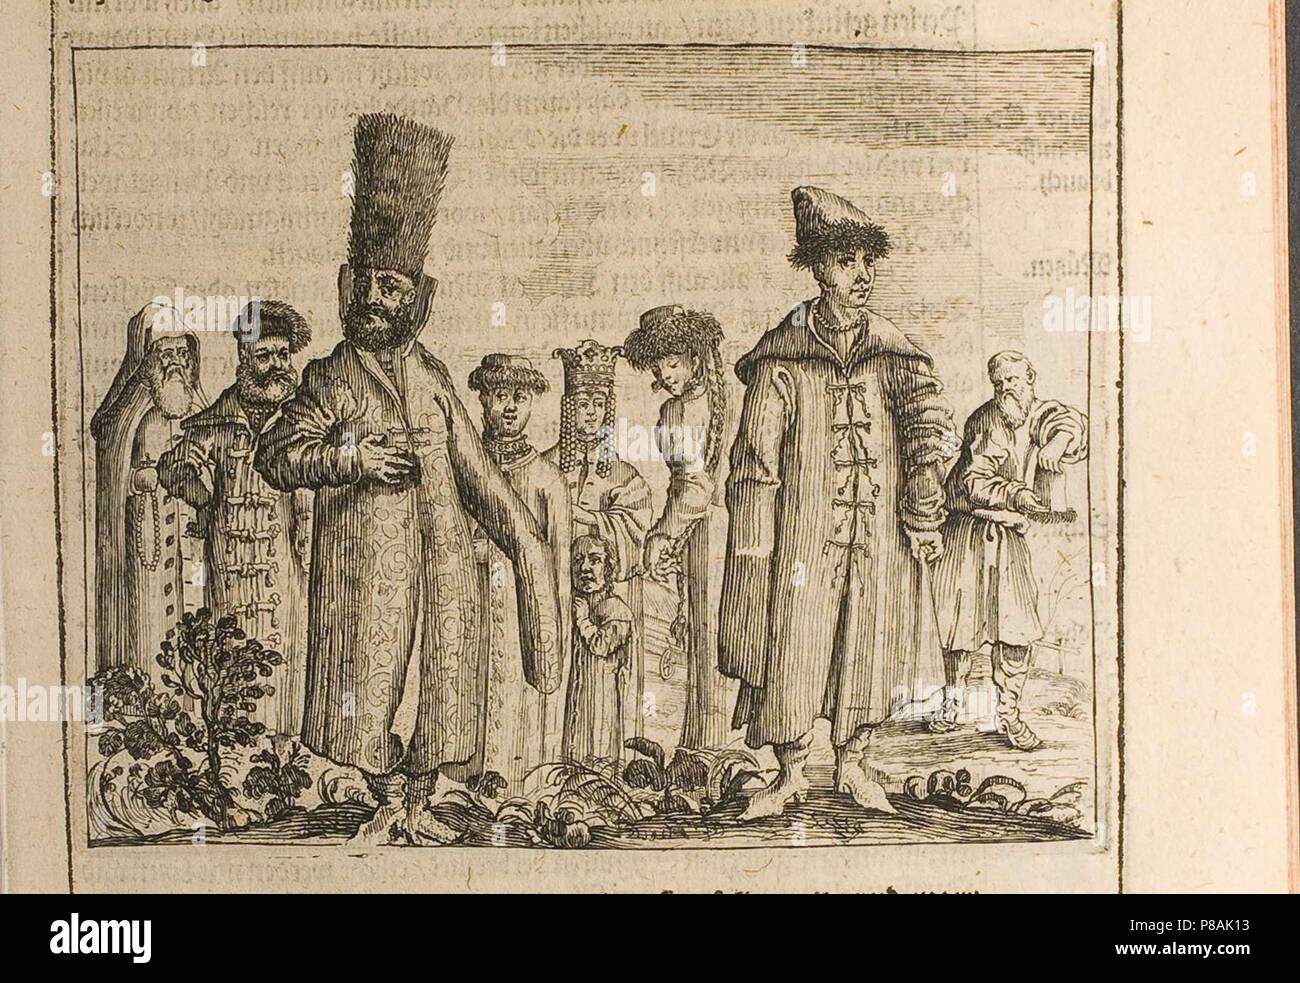 Traditional dress of Moscovites (Illustration from 'Travels to the Great Duke of Muscovy and the King of Persia' by Adam Oleariu. Museum: PRIVATE COLLECTION. Stock Photo